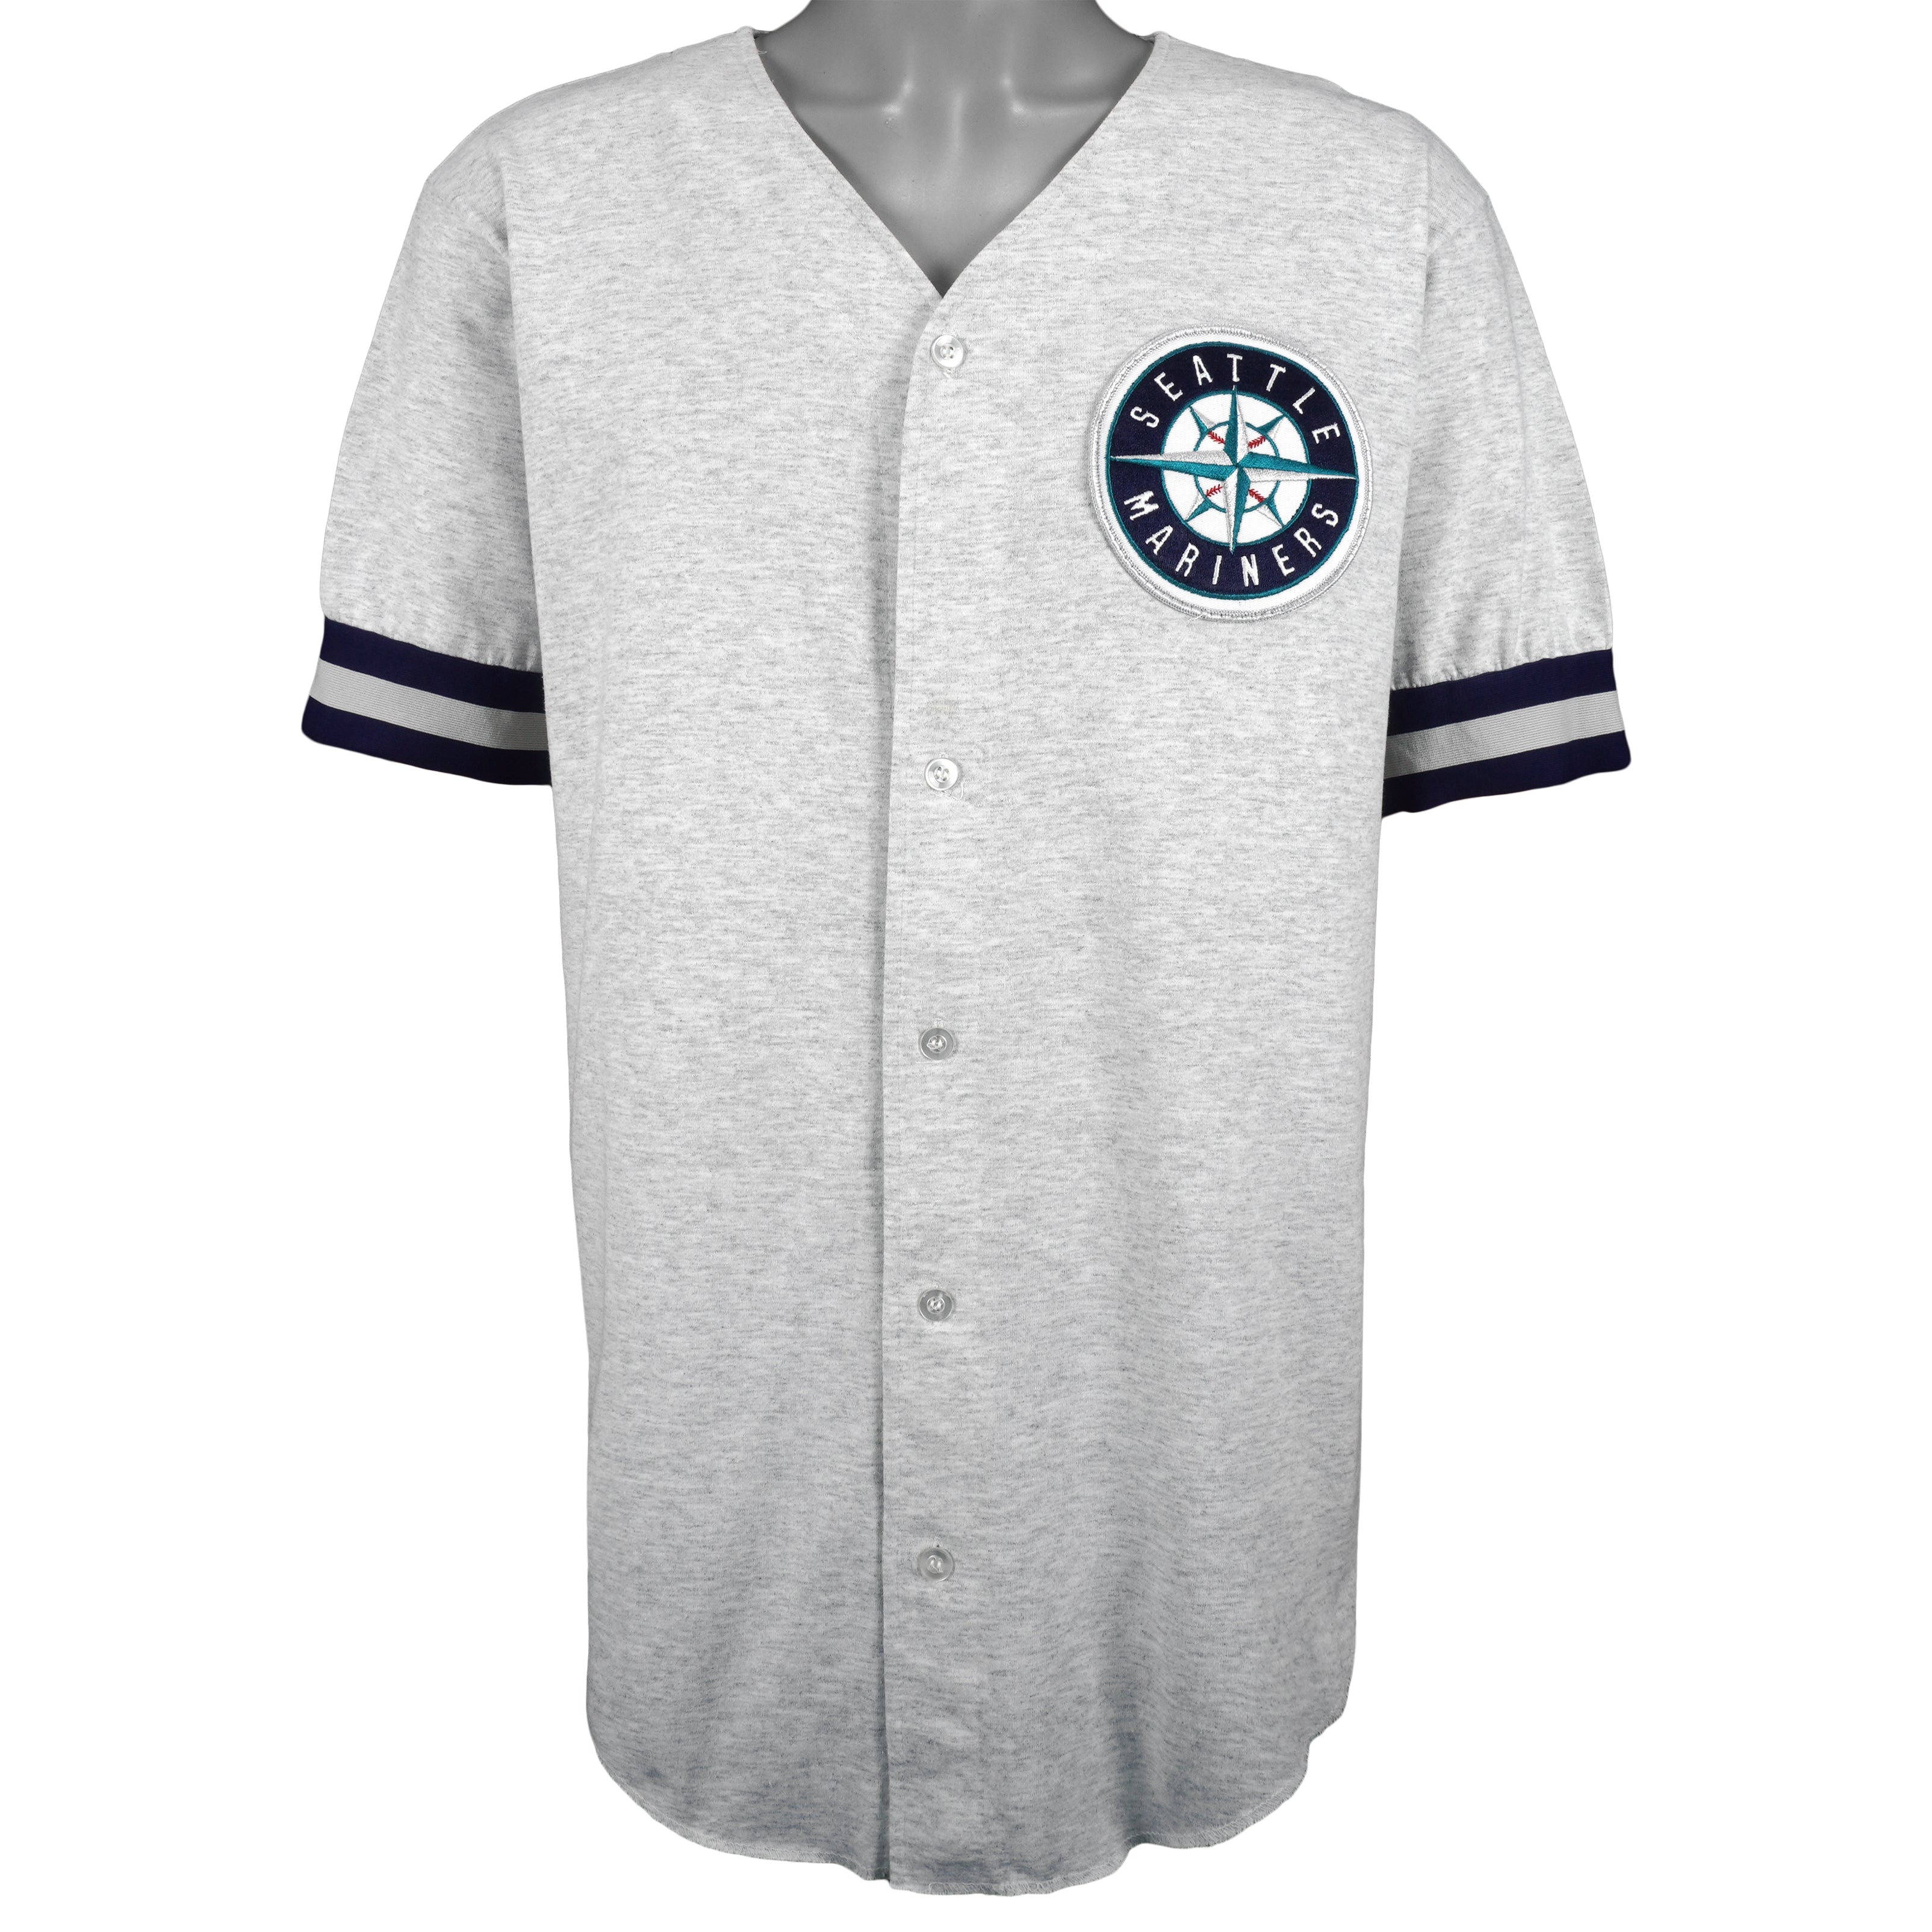 Seattle Mariners Jersey MENS XL Sewn retro Button Up MLB Vtg 90s